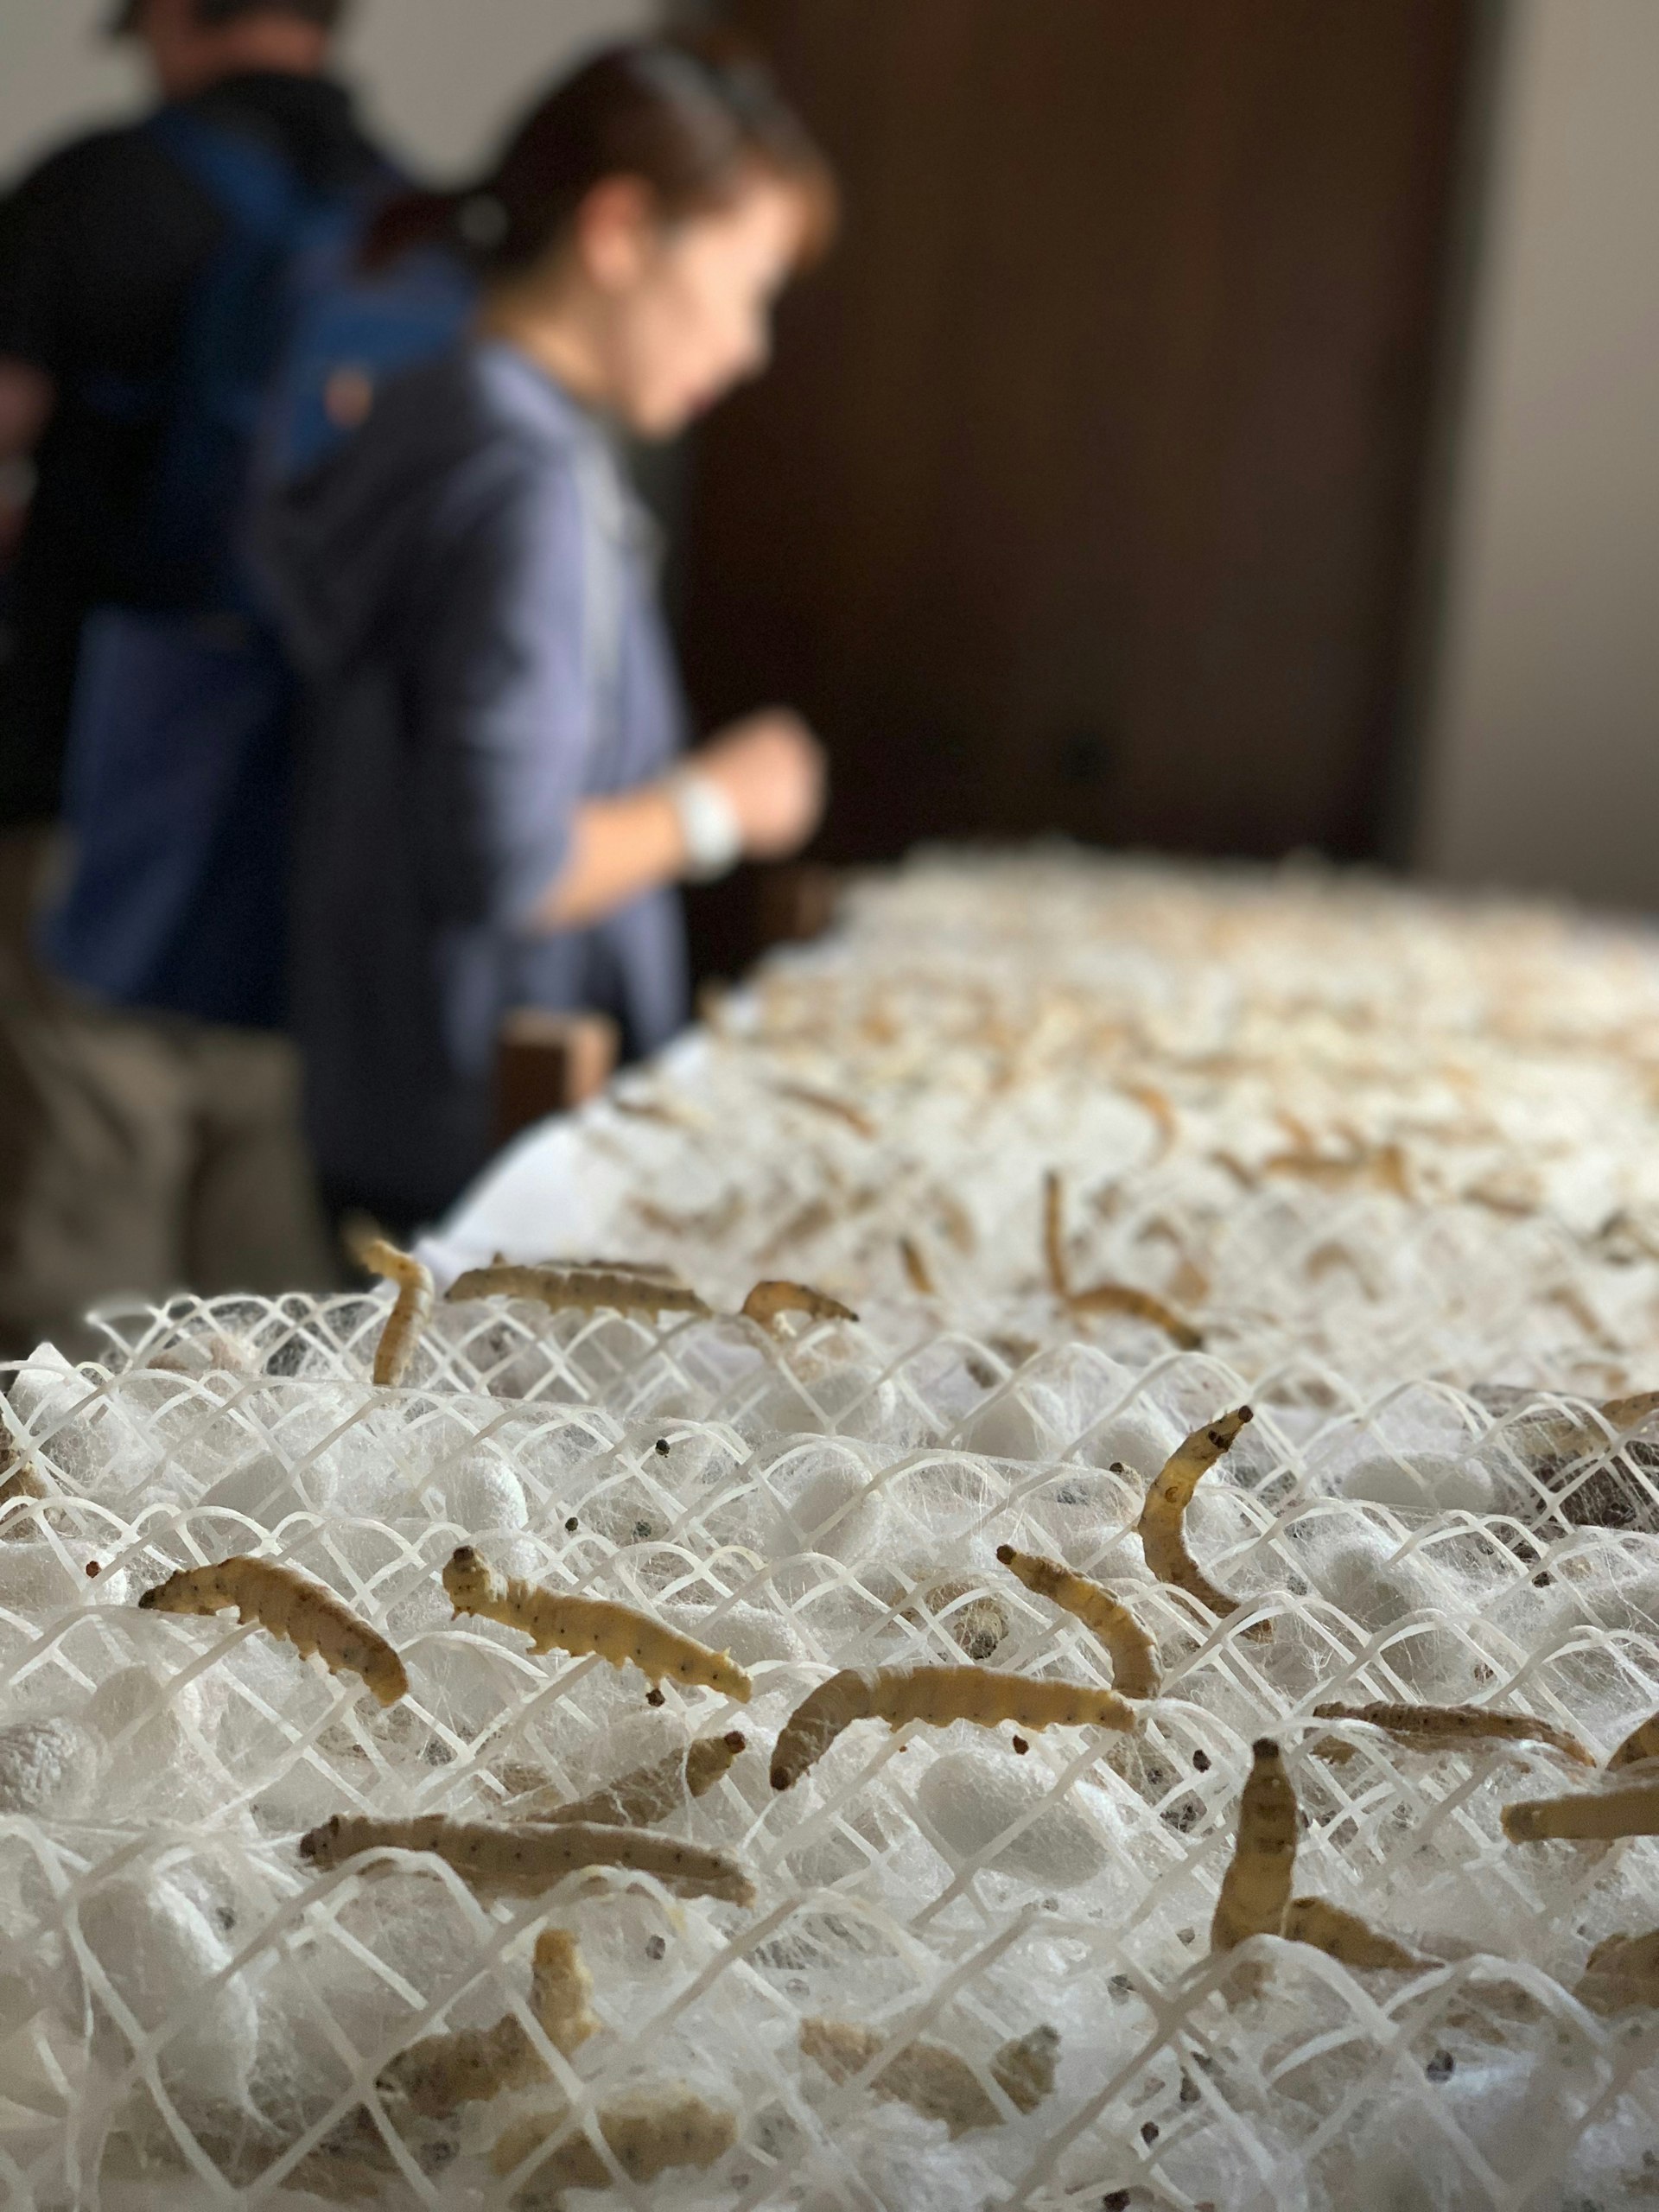 A close-up shot of silkworms on a pile of silk in a factory in Suzhou. In the background, a blurred figure is visible.